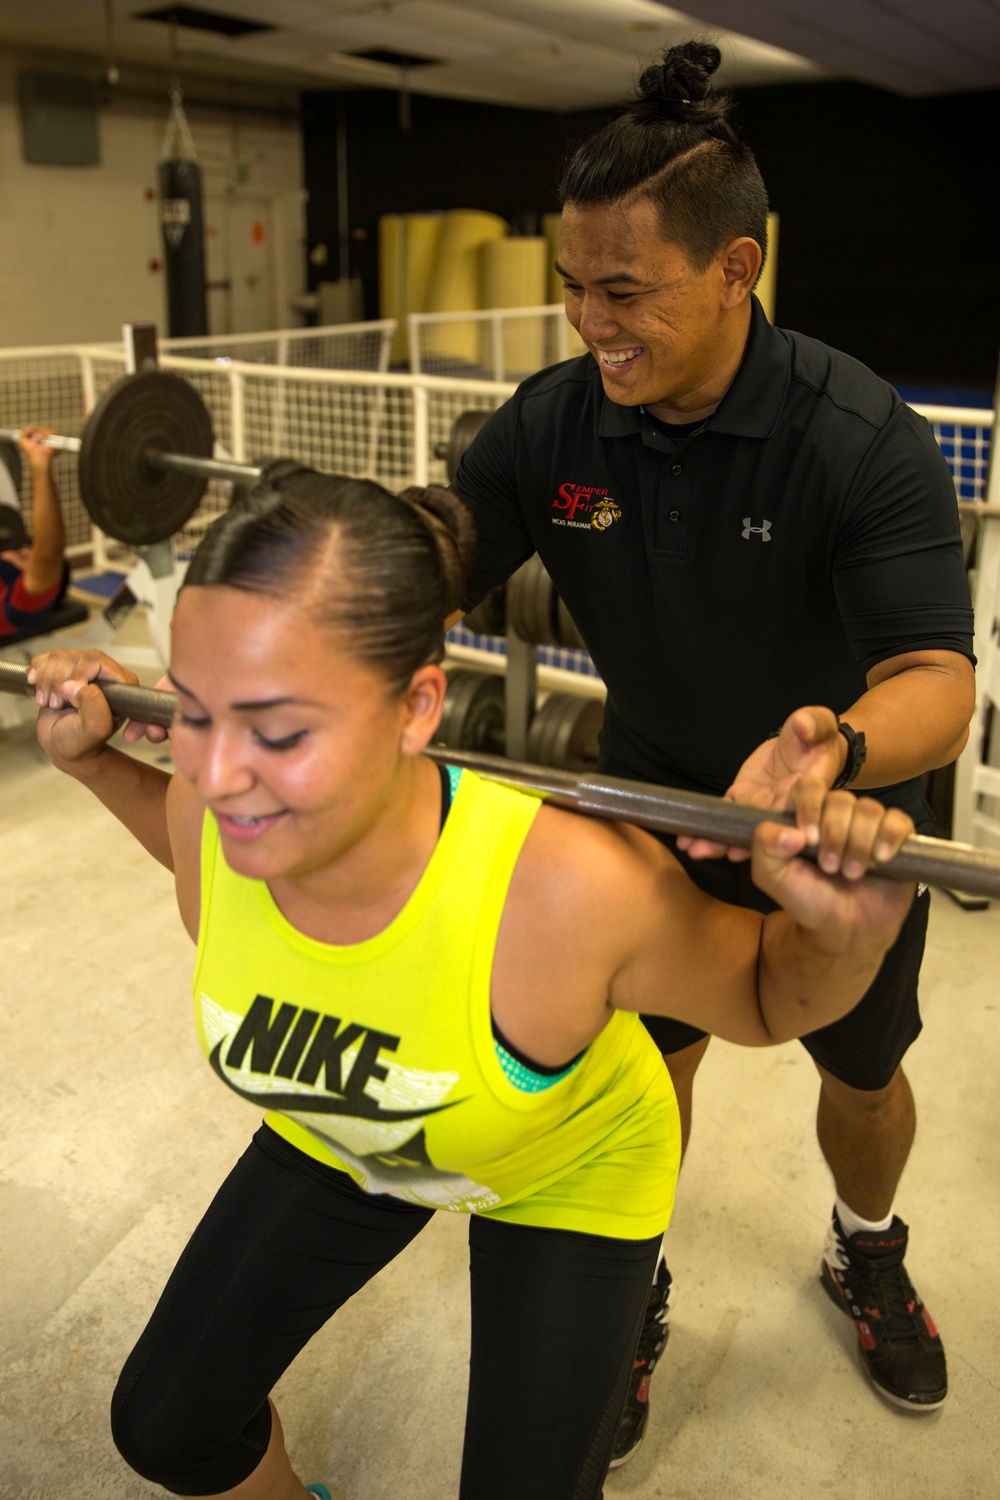 Fit to fight: personal trainer helps Service members get fit after injury